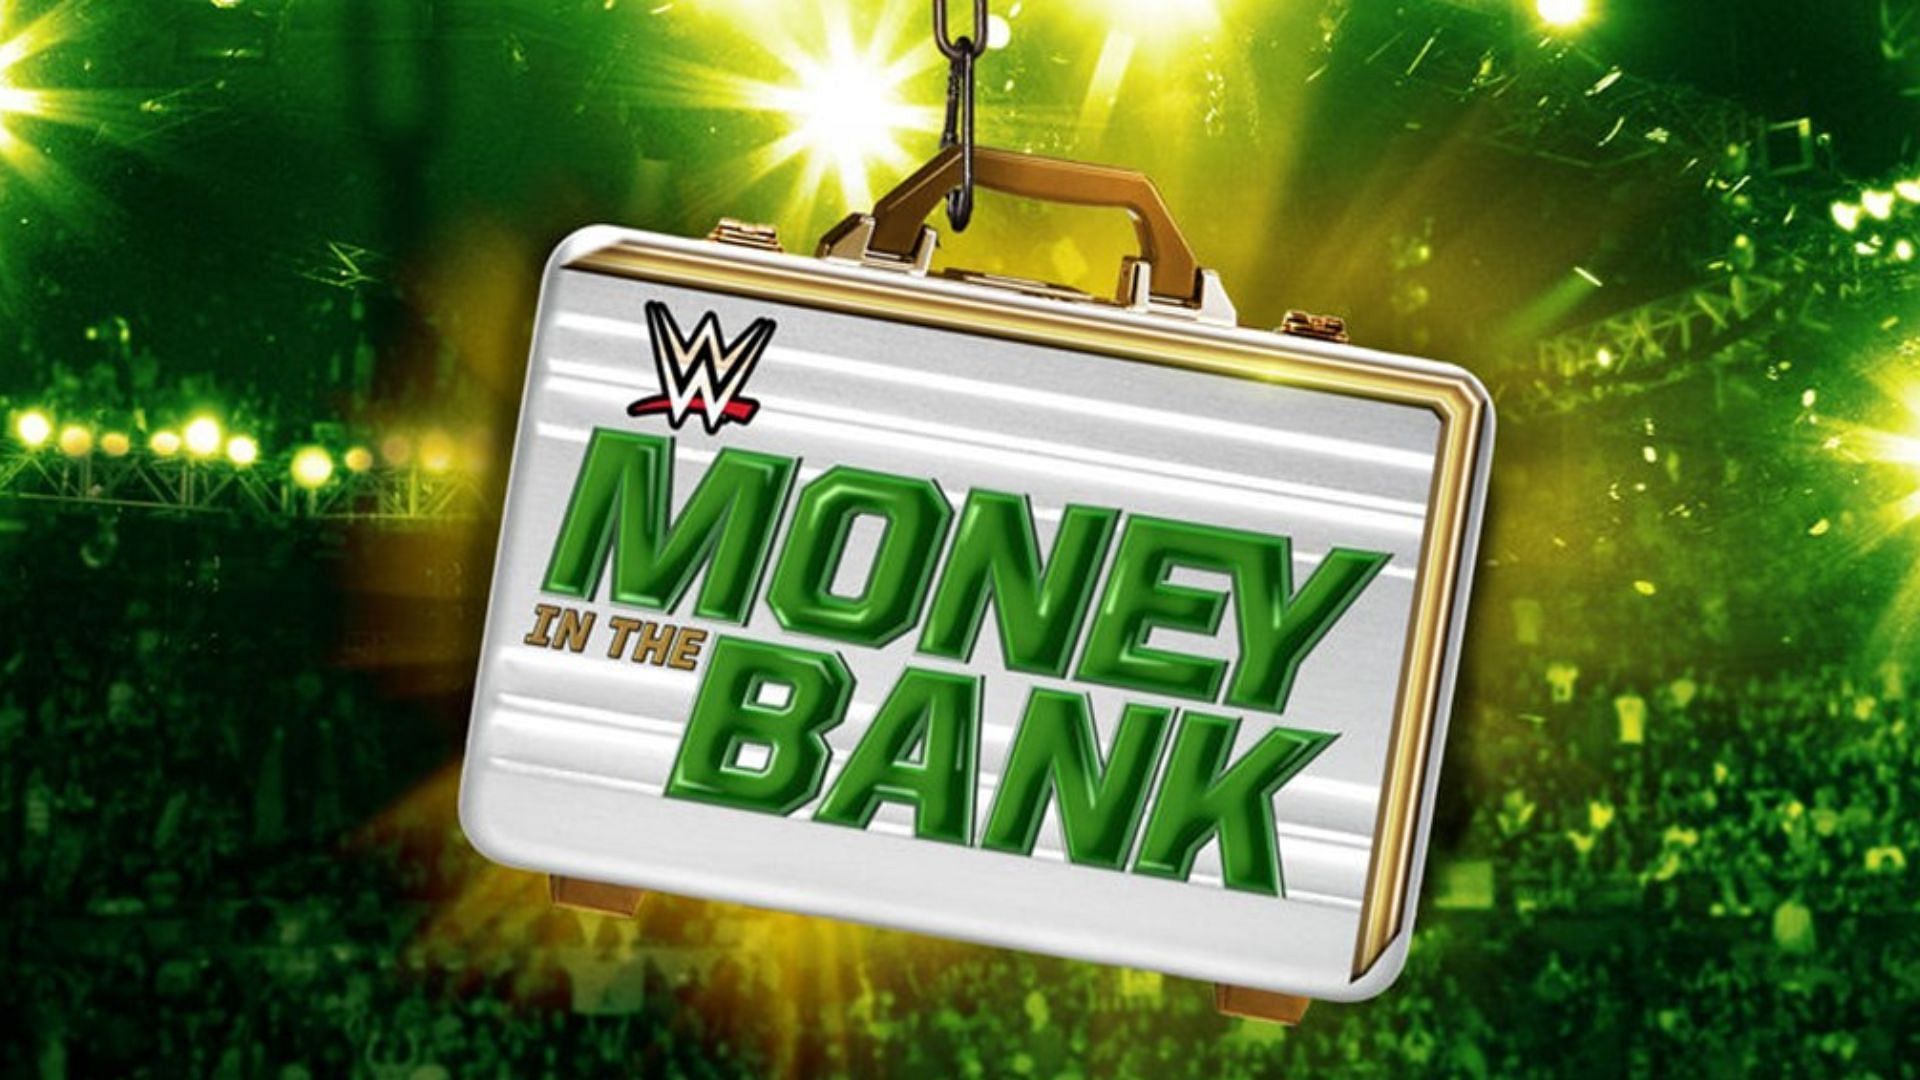 WWE Money in the Bank will take place on July 1st.